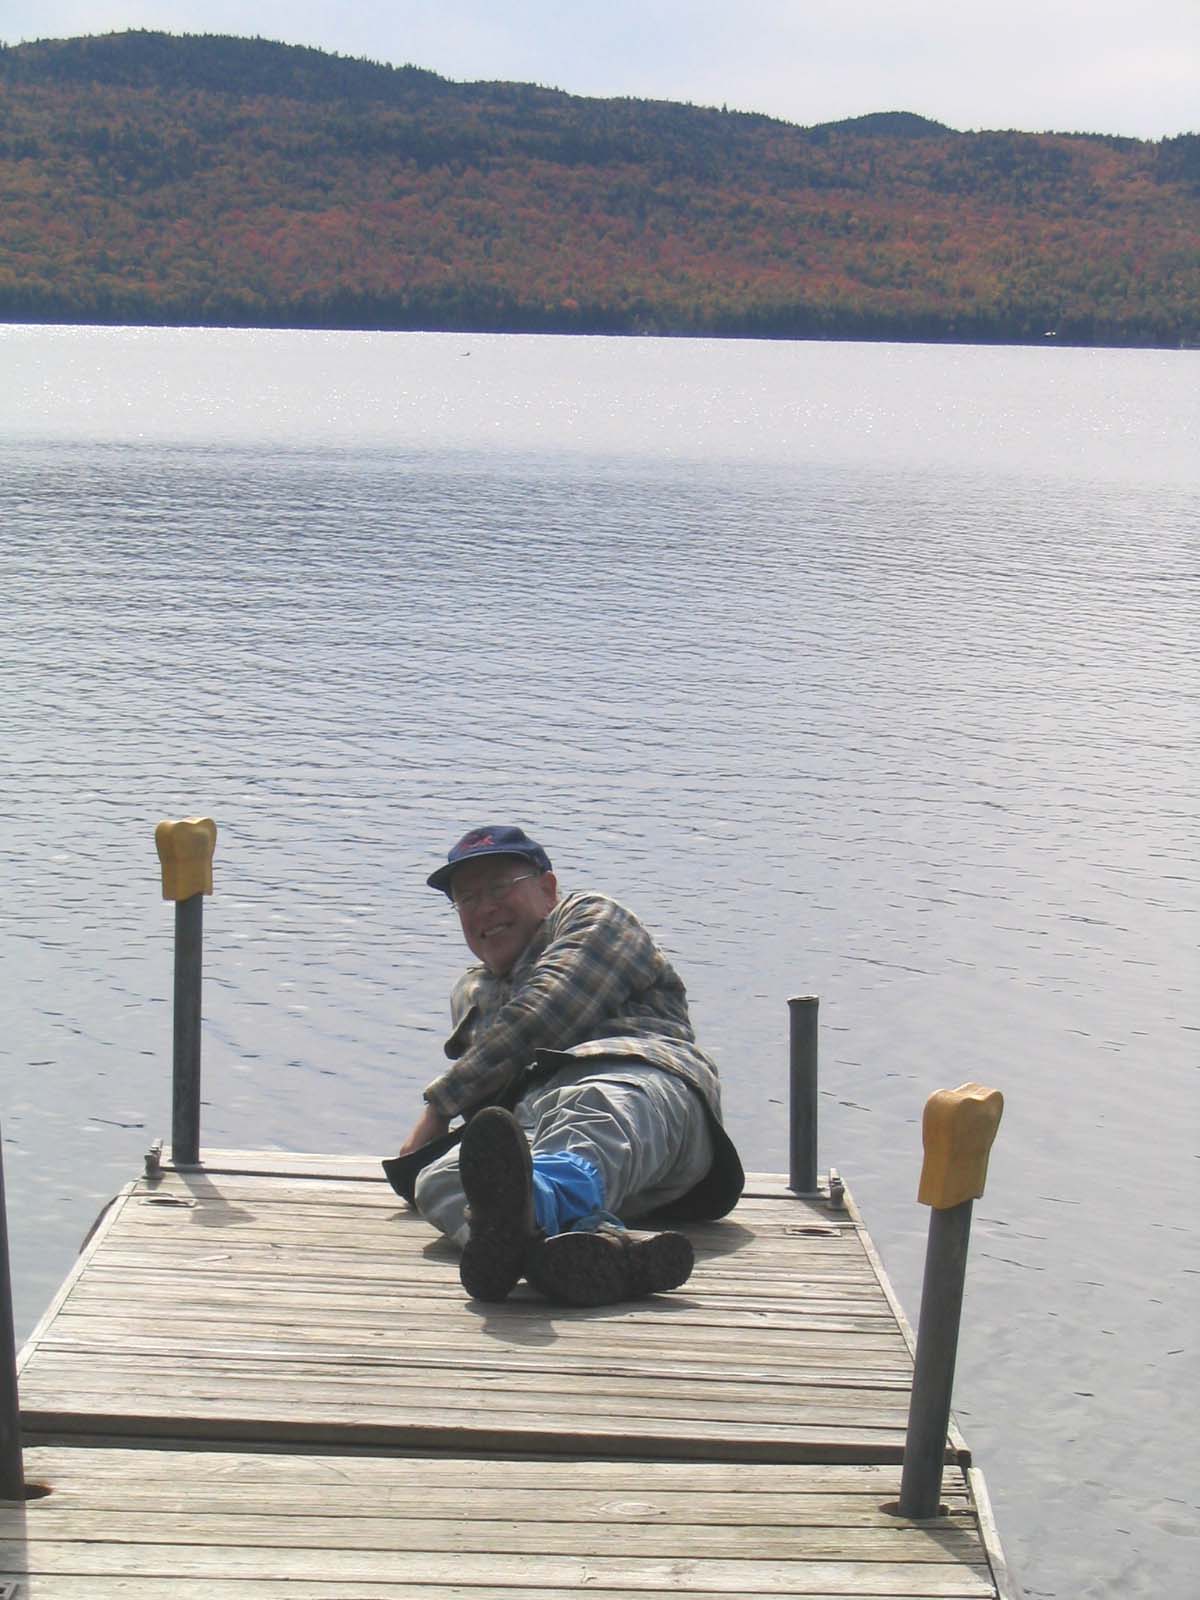 31.0 MM. Pleasant Pond, another nice Maine lake to have a picnic along the shore, take a break at or enjoy a swim in. Here I am lounging in the sun on the dock. There is easy access to here via Pleasant Pond Road and Boise-Cascade lumber road. Courtesy askus3@optonline.net